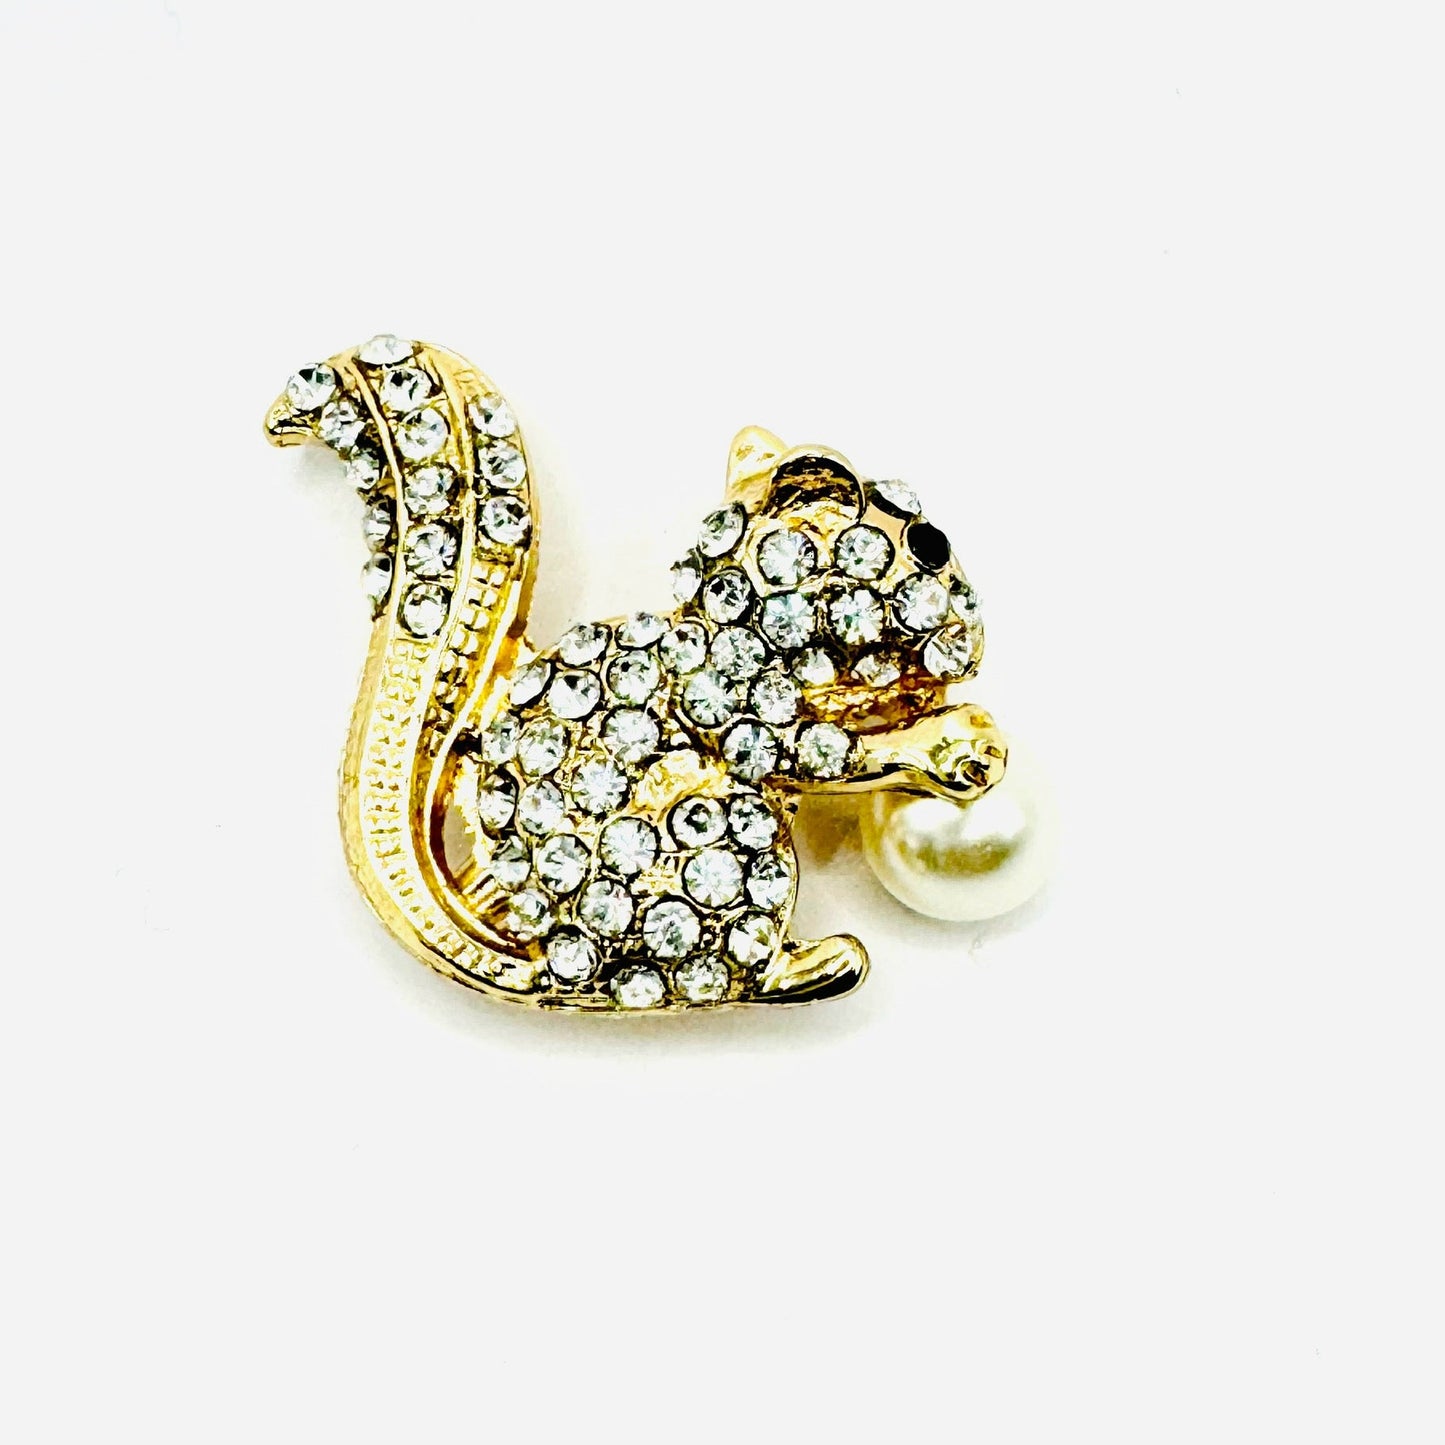 Animal Lover Brooch/Pins - House of FaSHUN by Shun Melson